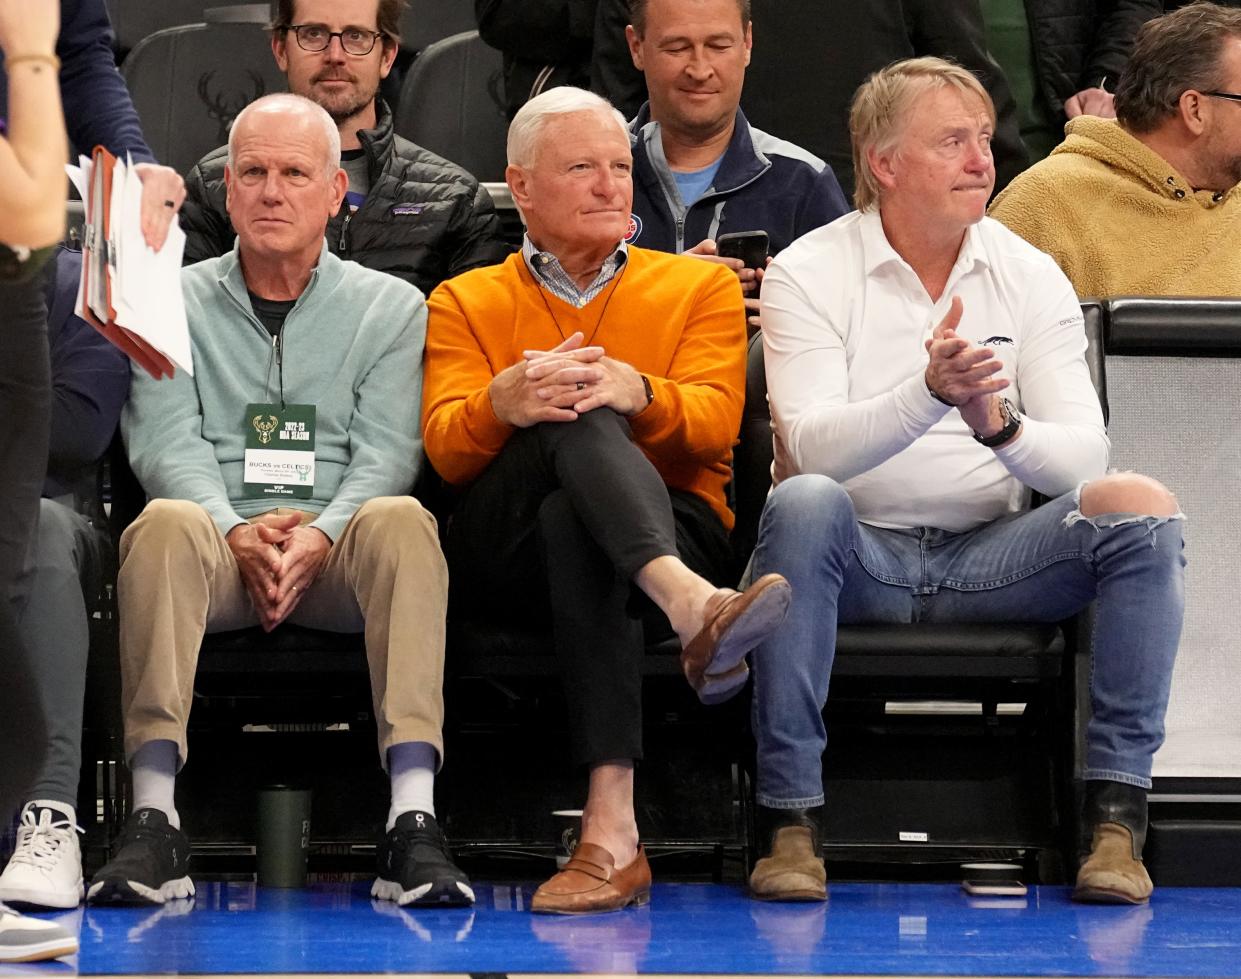 Before he became part-owner of the Bucks, Jimmy Haslam (orange sweater) attended a game with Wes Edens (right) on March 30, 2023 at Fiserv Forum. On the far left is Charles Slatery.